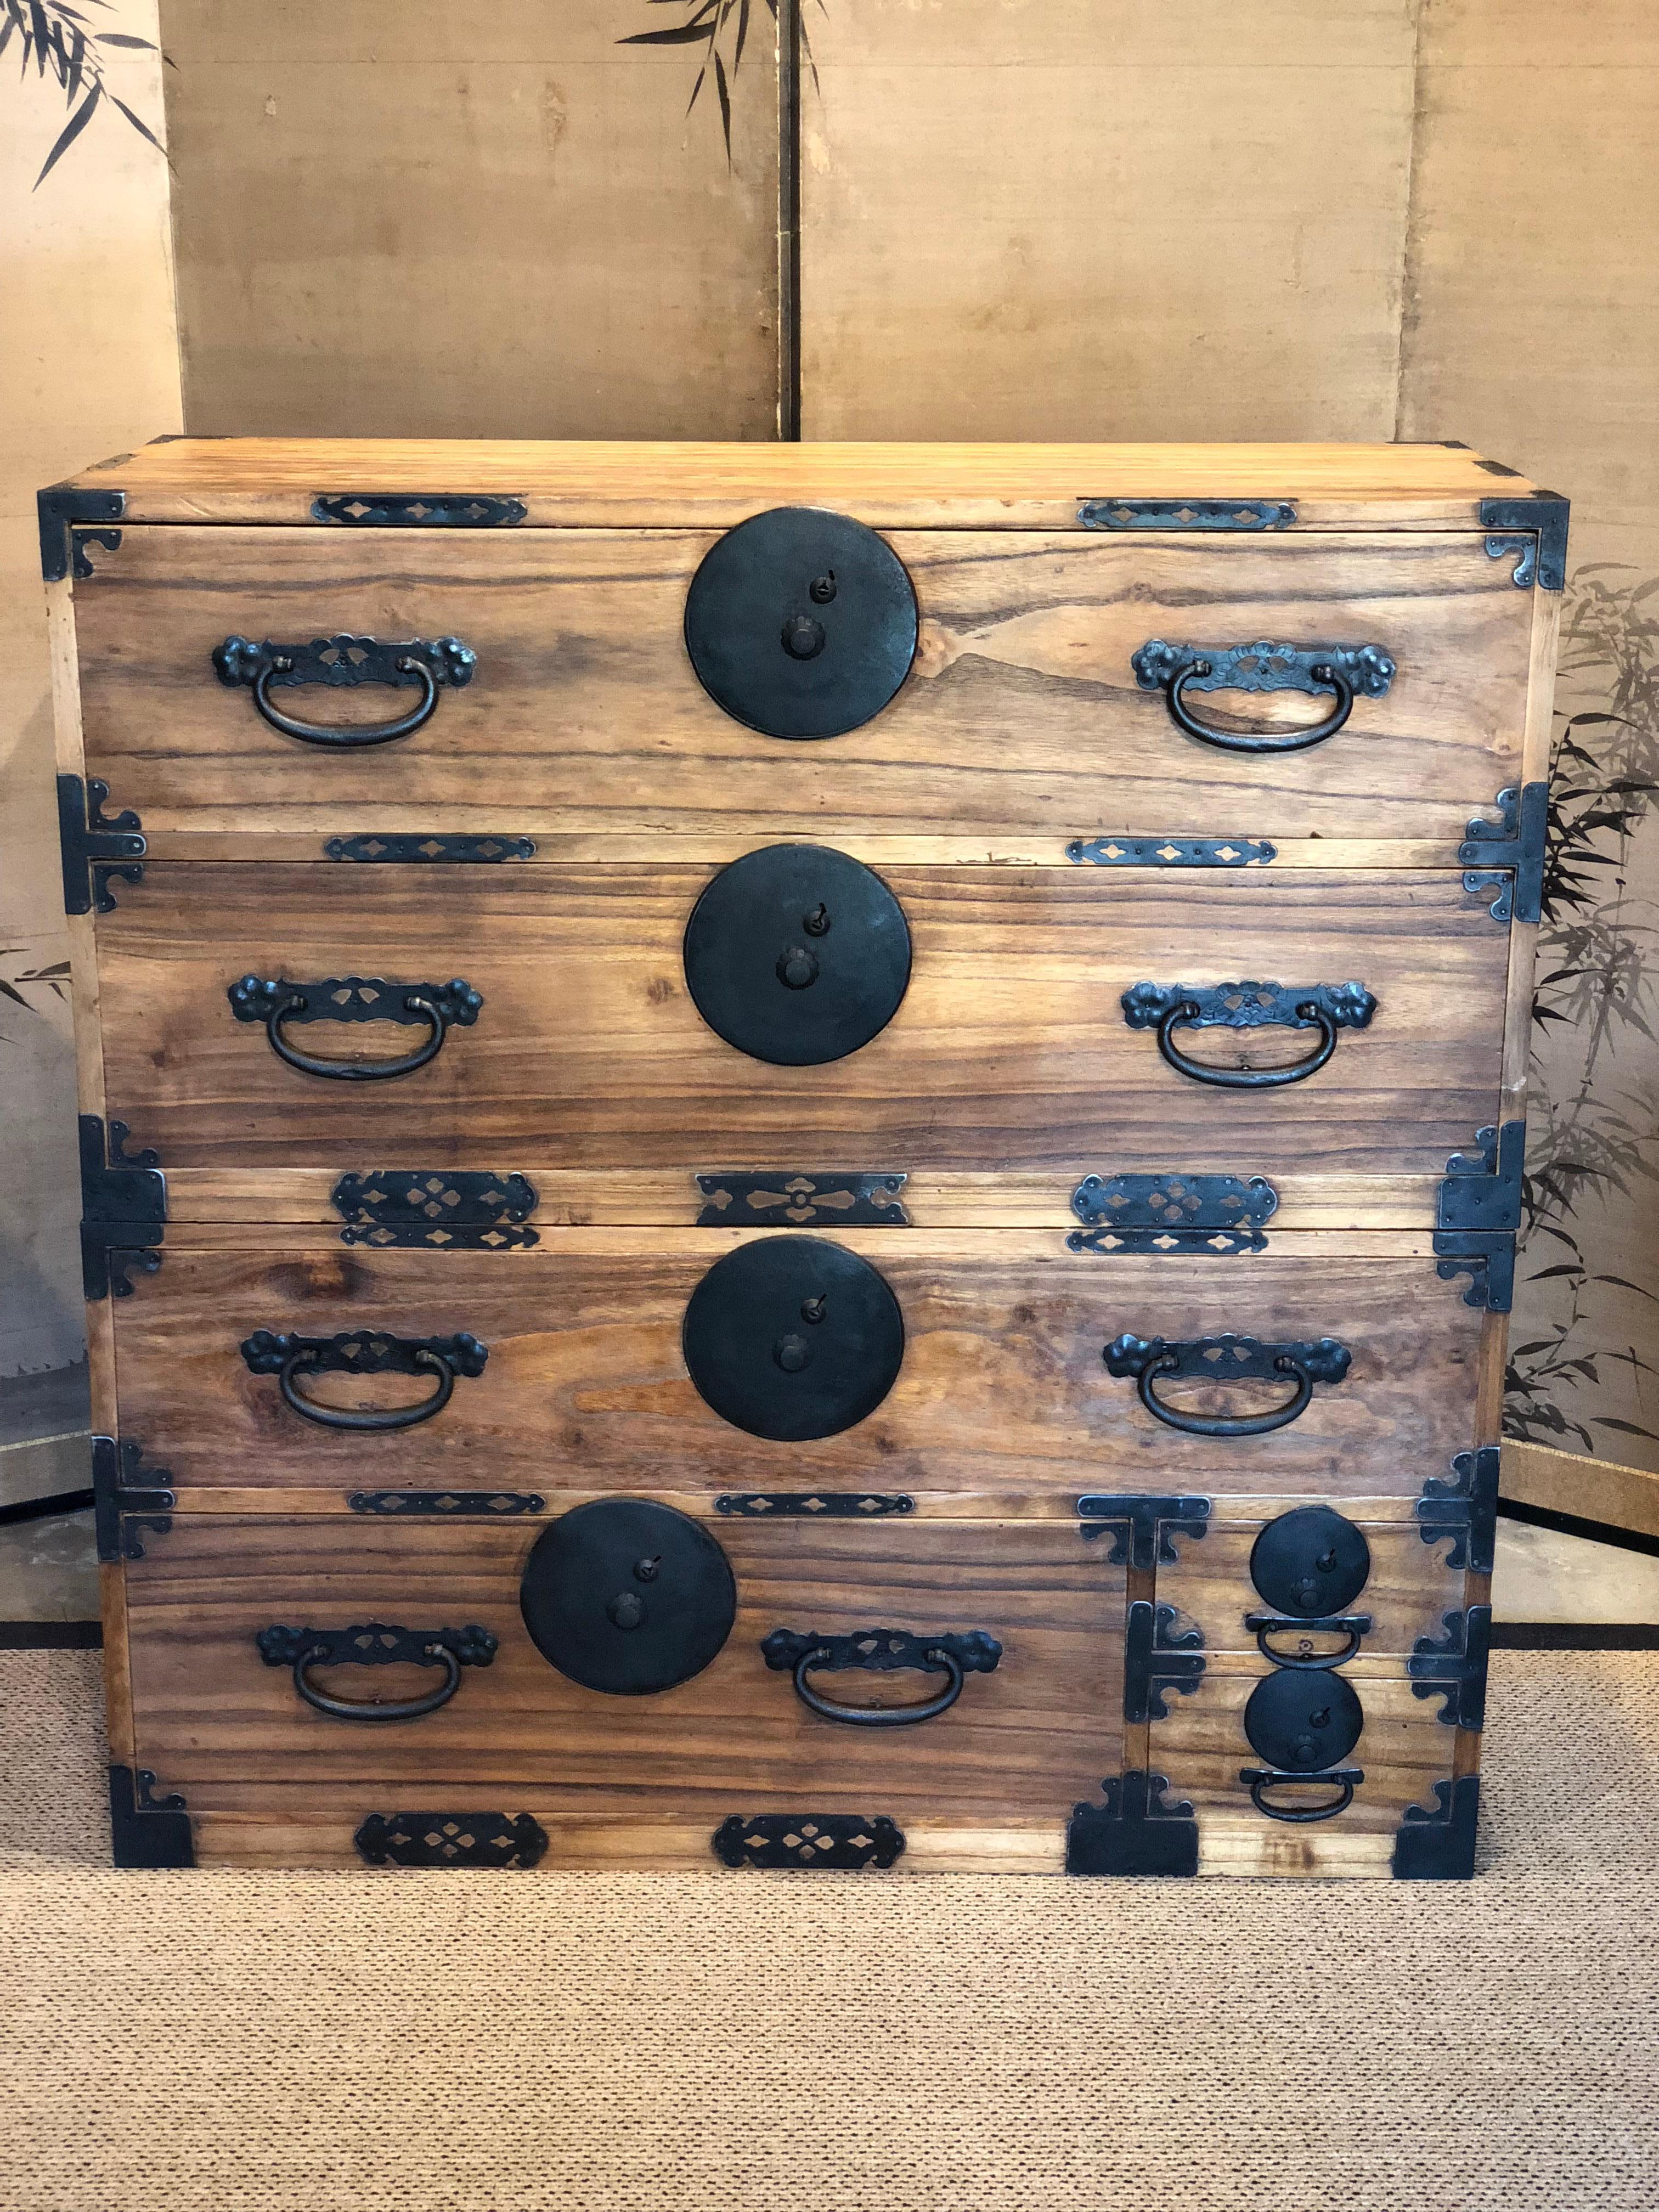 Japanese Tansu chest constructed of kiri with large iron handles and massive iron lock plates with a distinctive motif. Elongate escutcheon are gracefully fitted behind each handle. Heavy metal strapping hinges protect and reinforce the safe door.